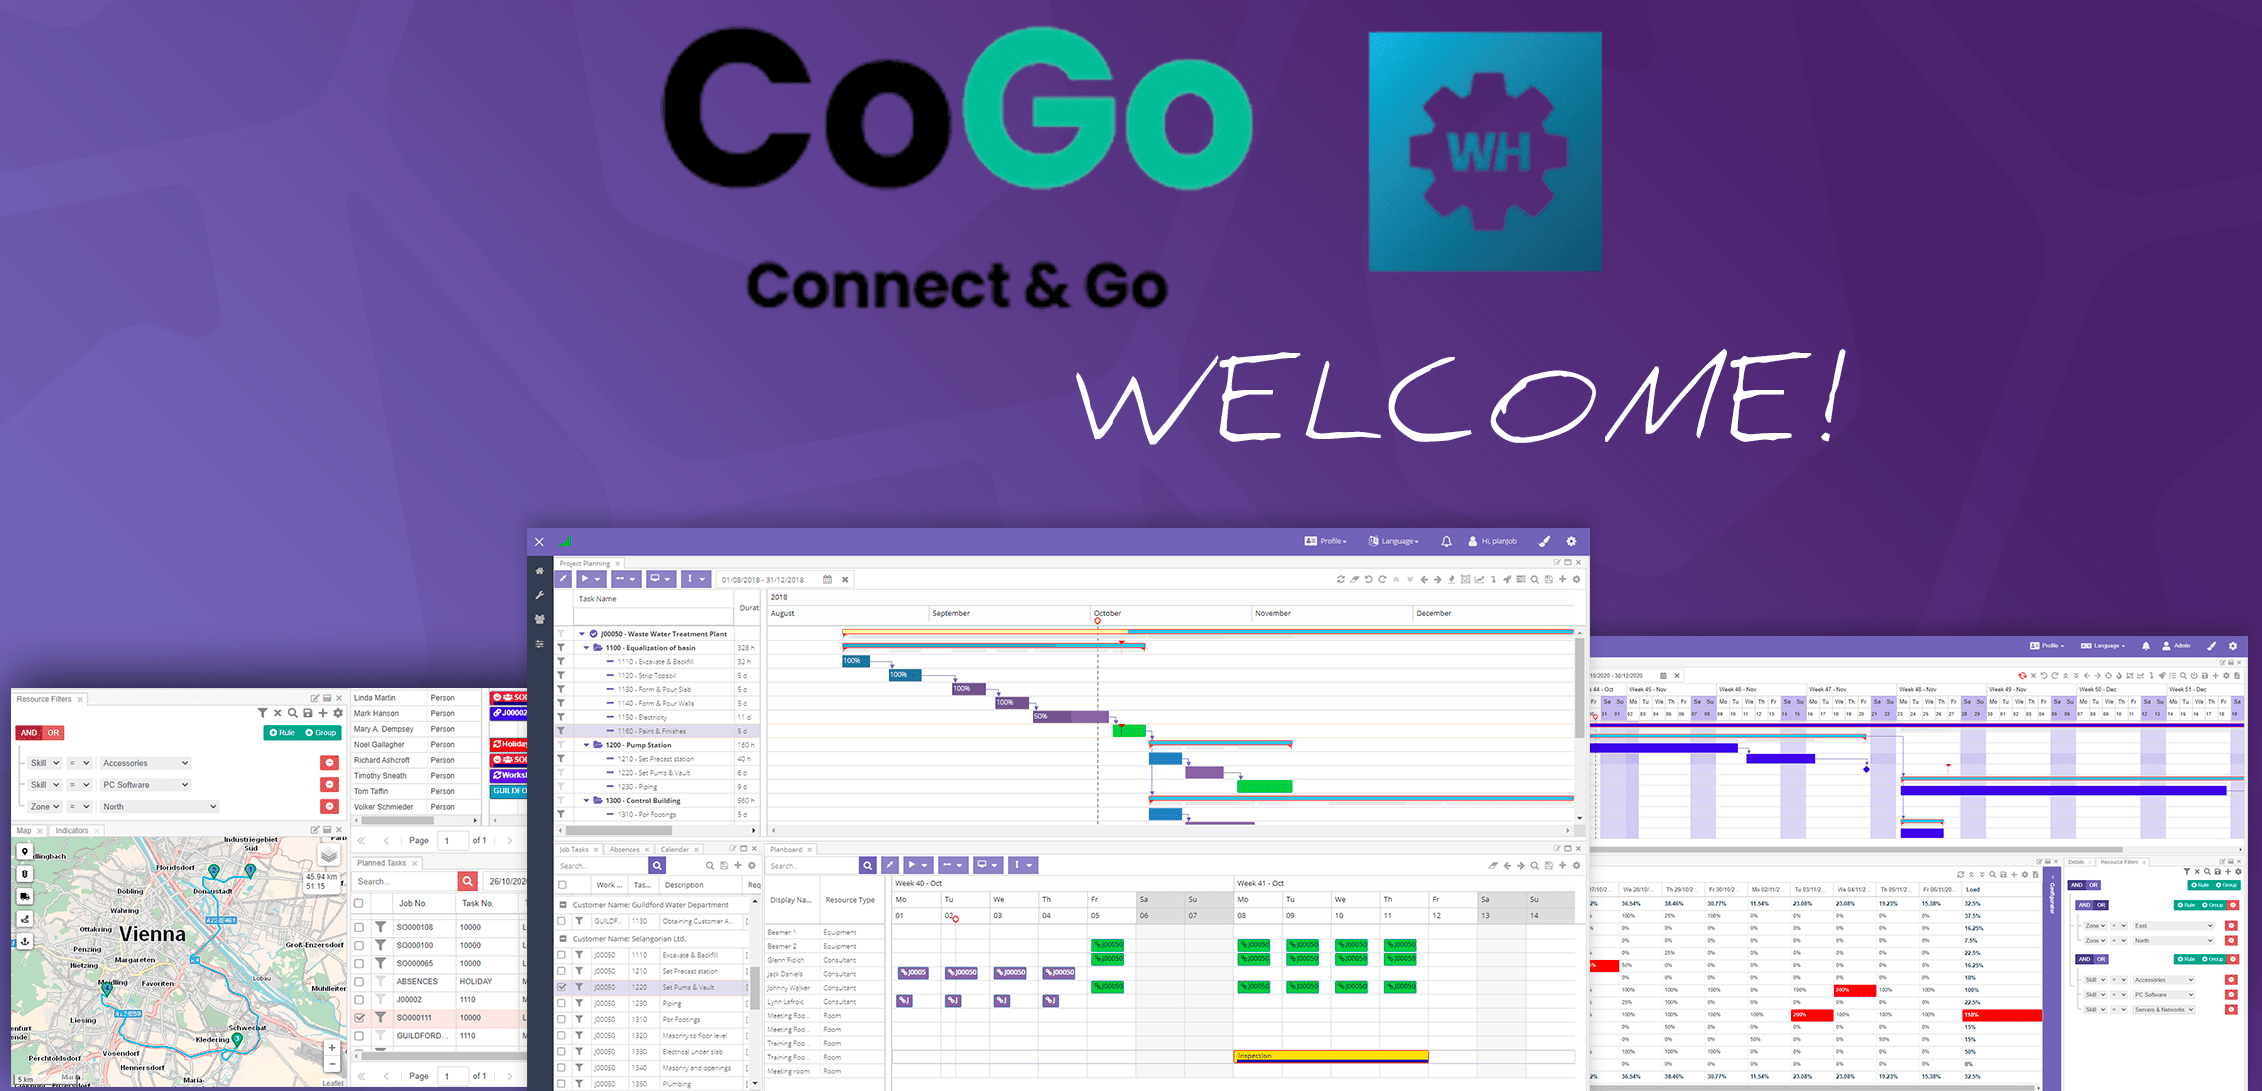 ds-reseller-cogo-welcome.png